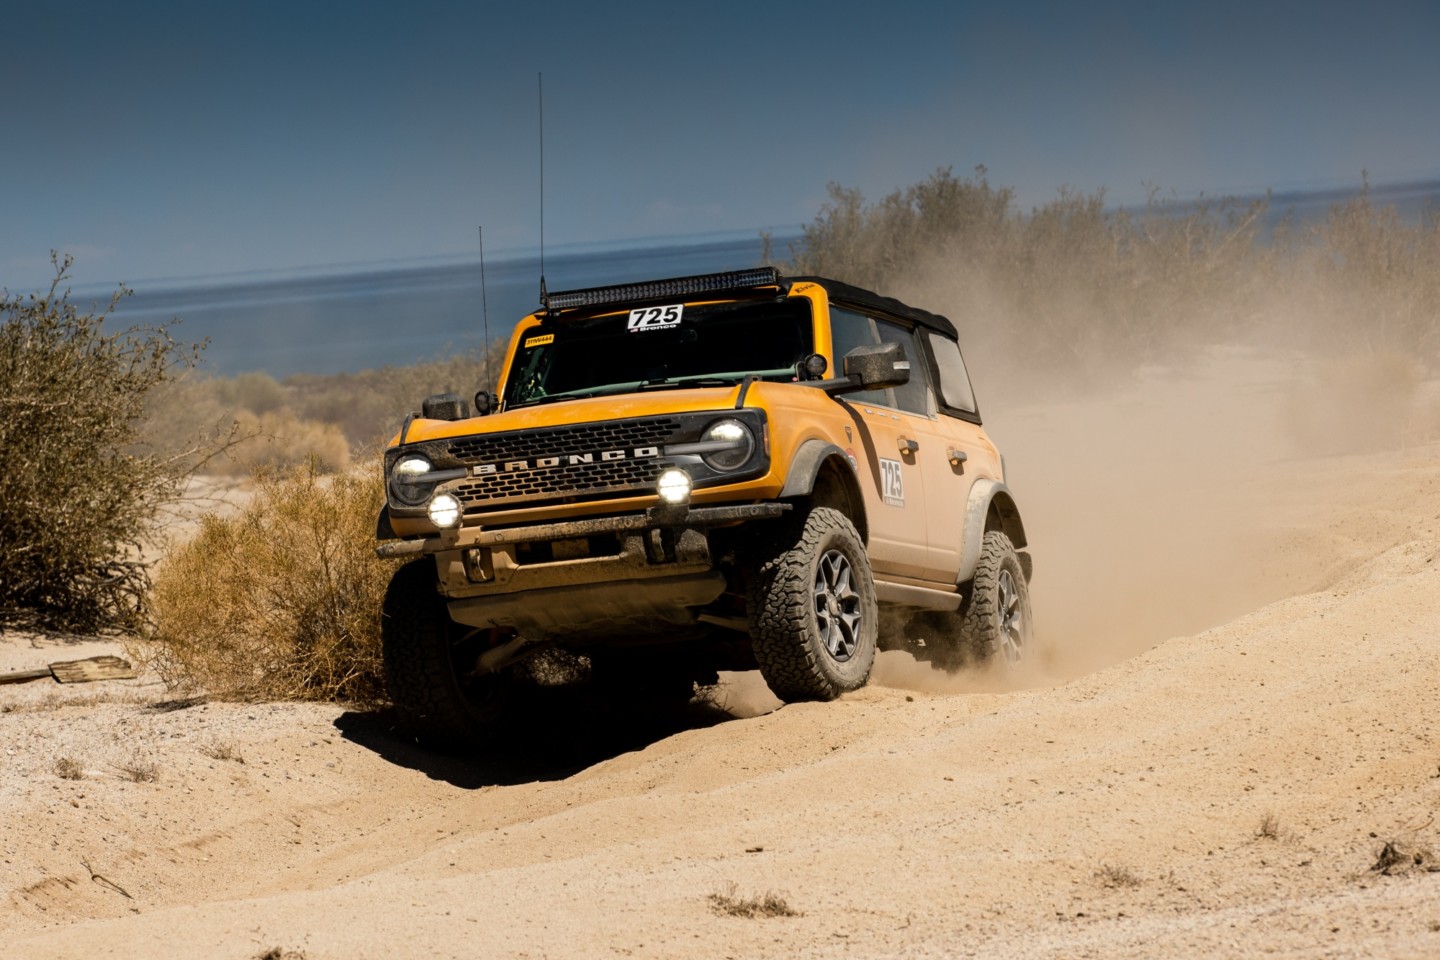 Stock Ford Bronco races to 3rd place finish at Norra Mexican 1000